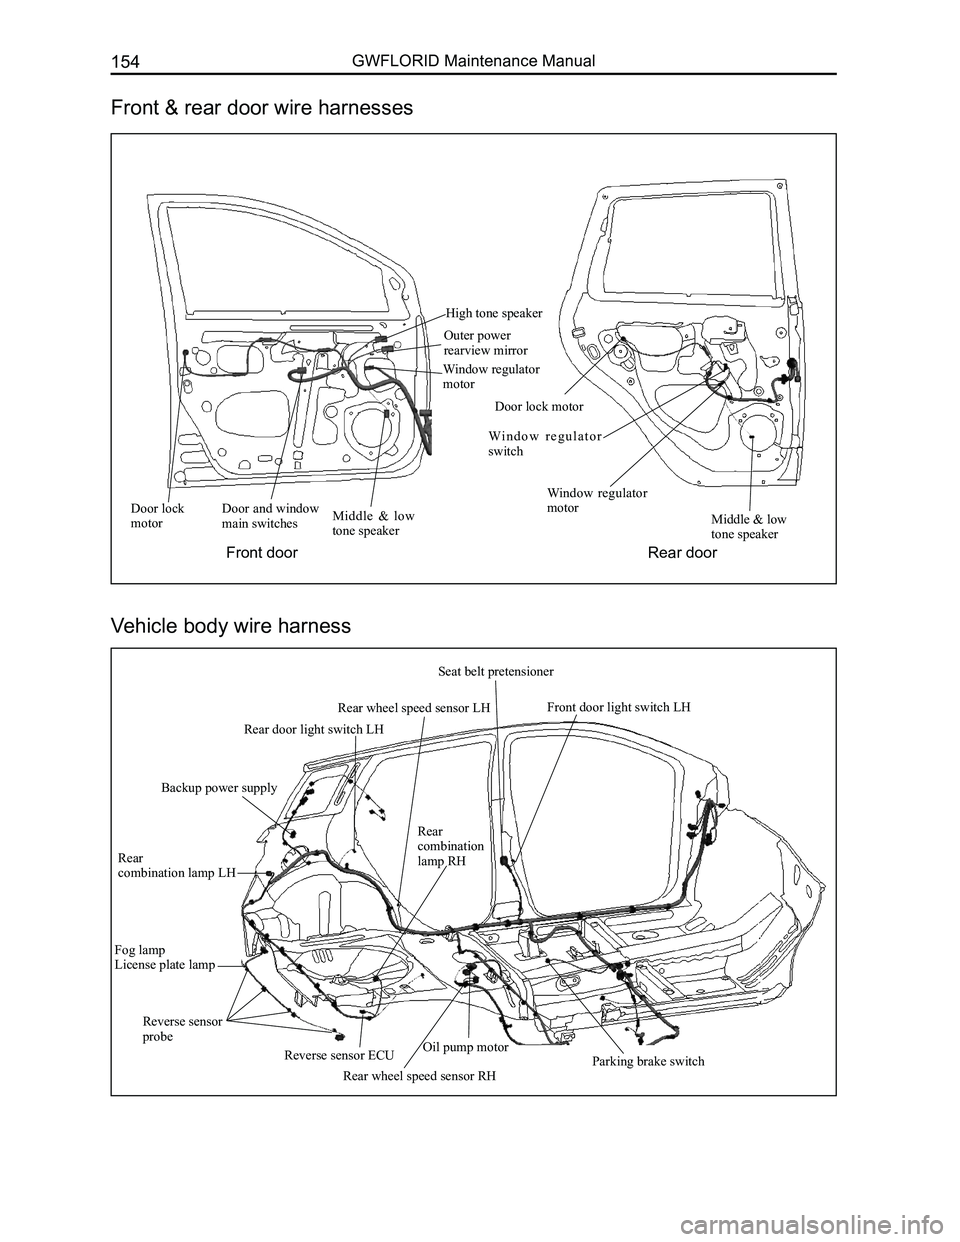 GREAT WALL FLORID 2008  Service Manual Downloaded from www.Manualslib.com manuals search engine GWFLORID Maintenance Manual154
Door lock motorDoor and window main switchesMiddle  &  low tone speaker
High tone speaker
Outer power rearview m